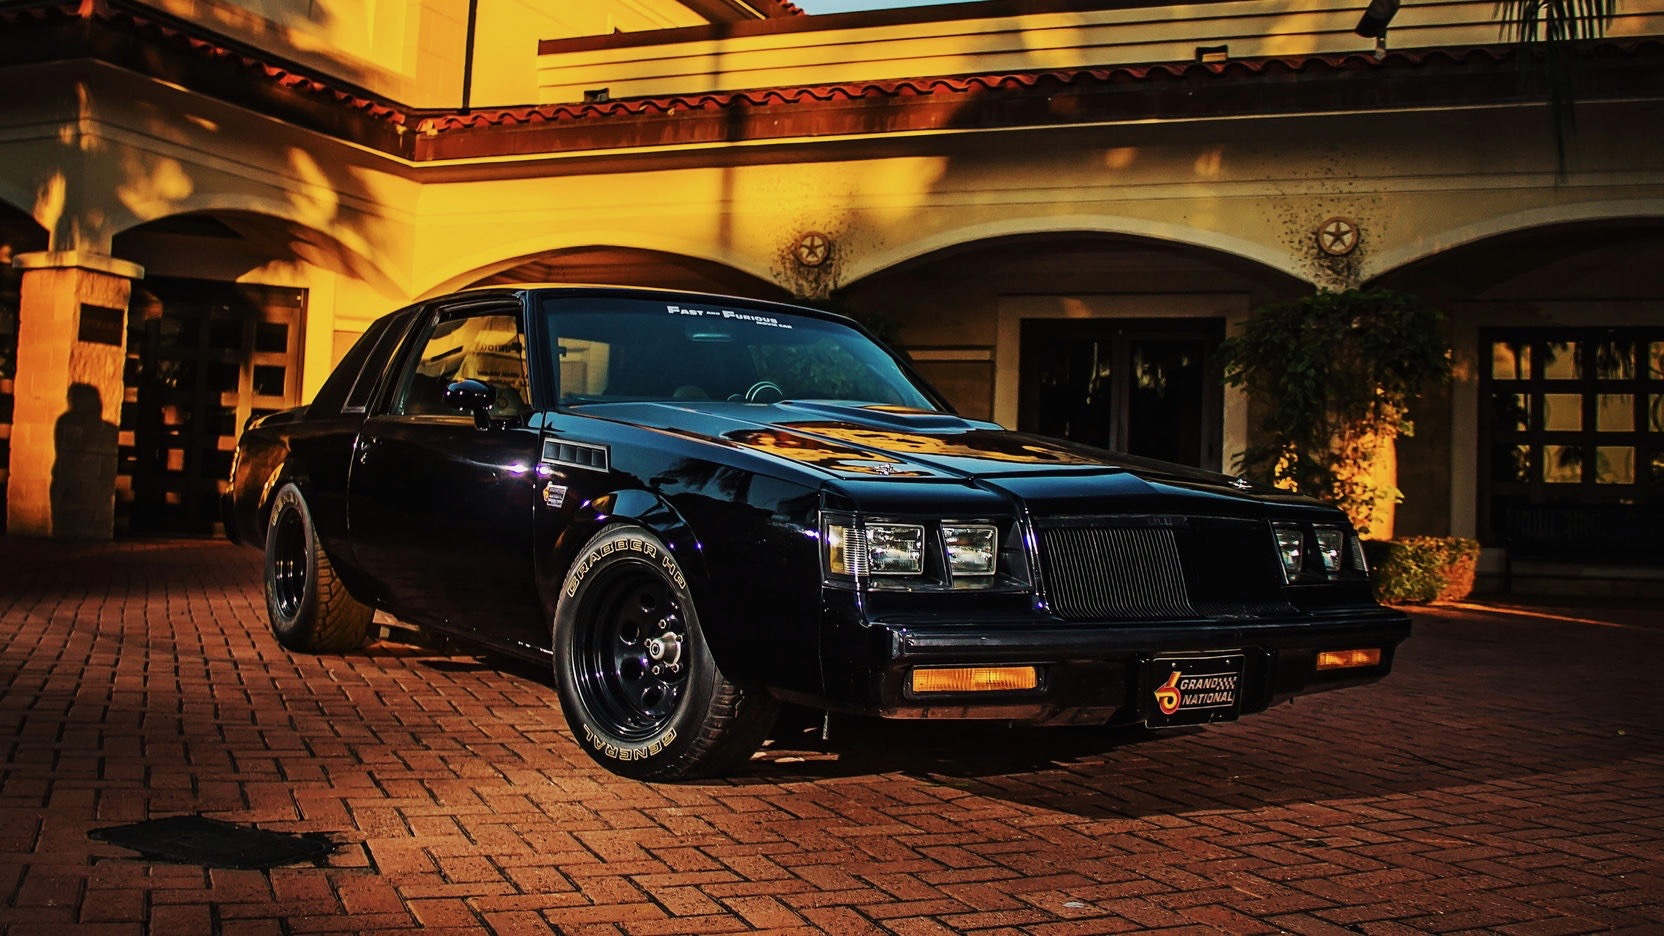 1986 Buick Grand National from "Fast & Furious" (Photo by Mecum)